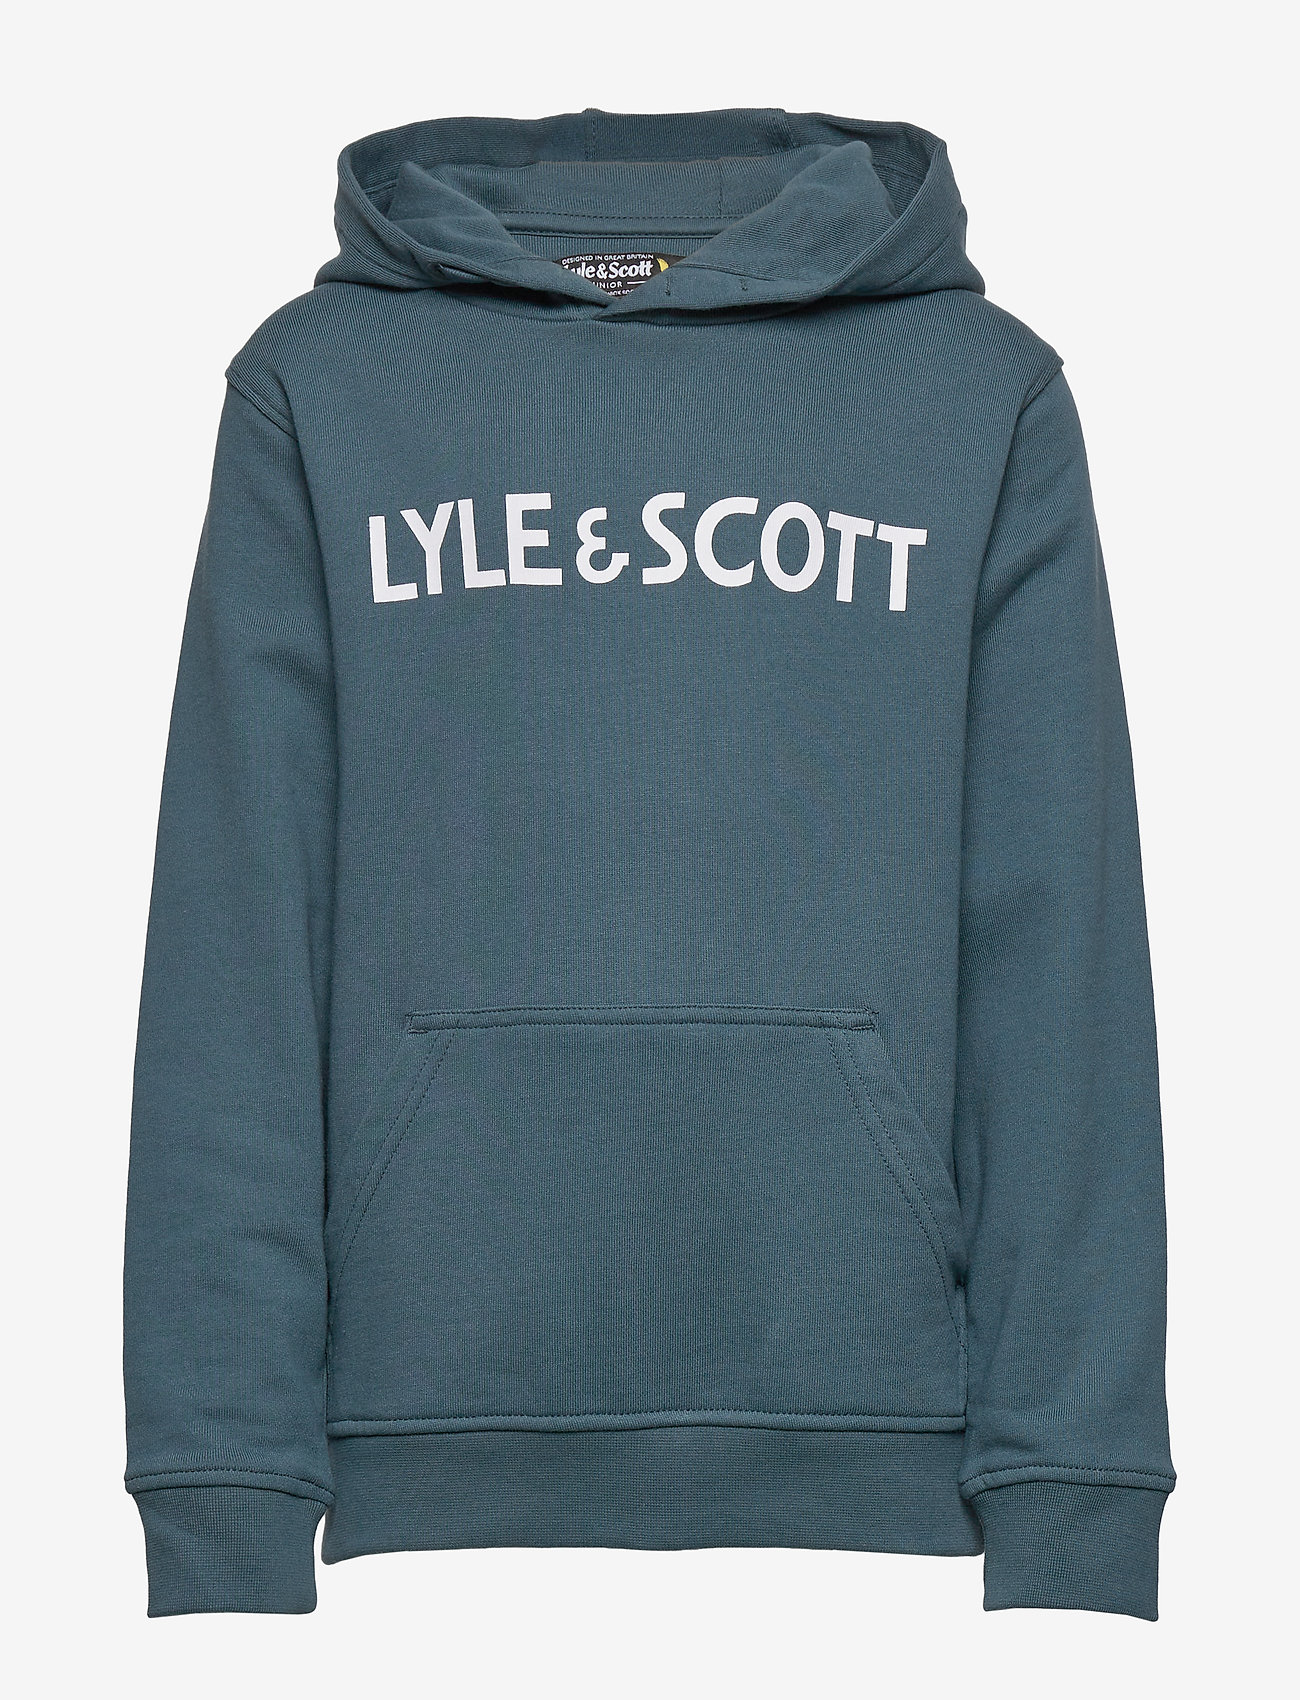 lyle and scott blue hoodie